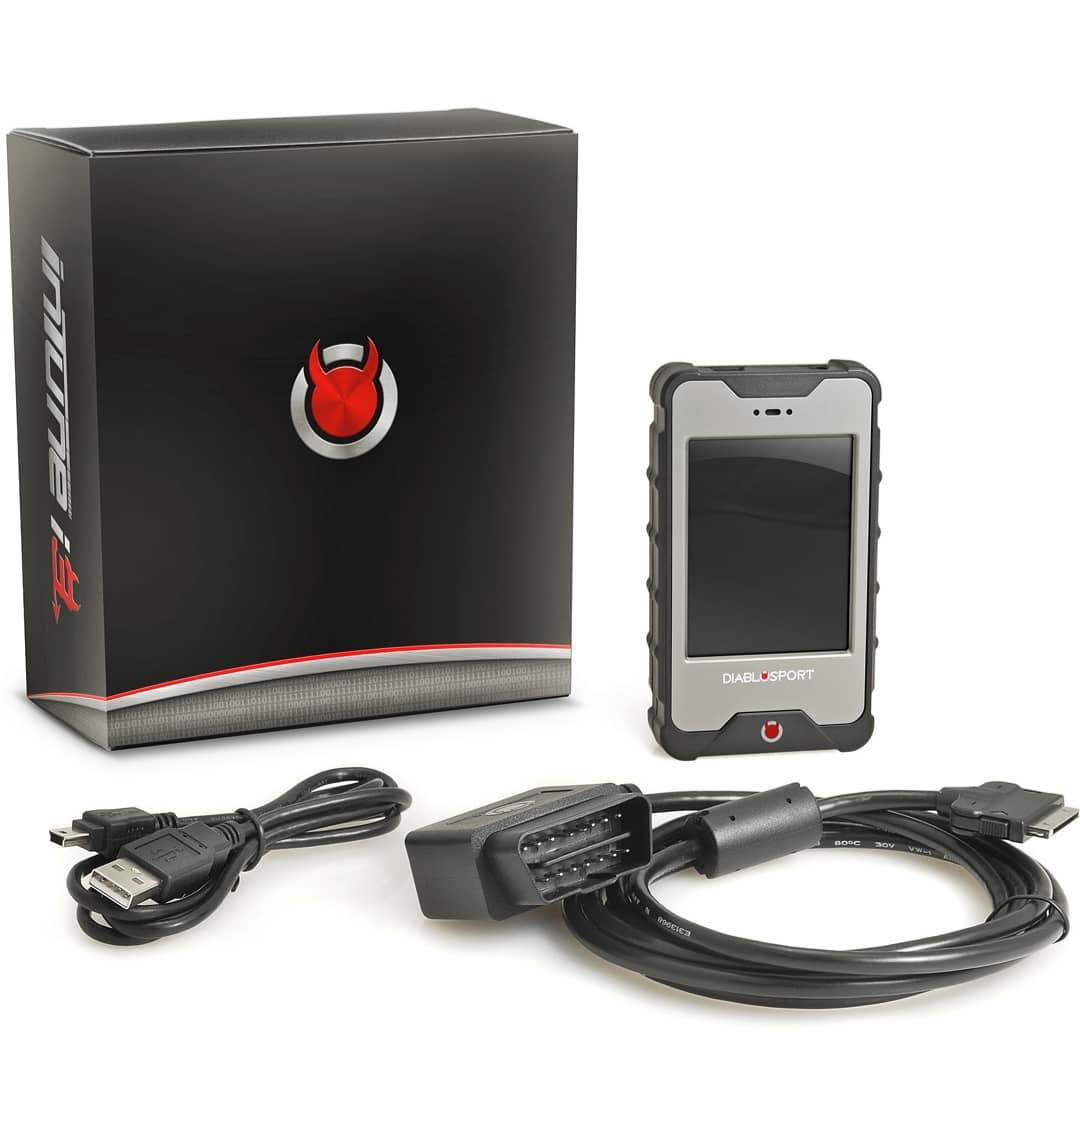 Diablo i3 with new pcm for Jeep Wrangler JL (Pre-orders Only) - am-wrangler